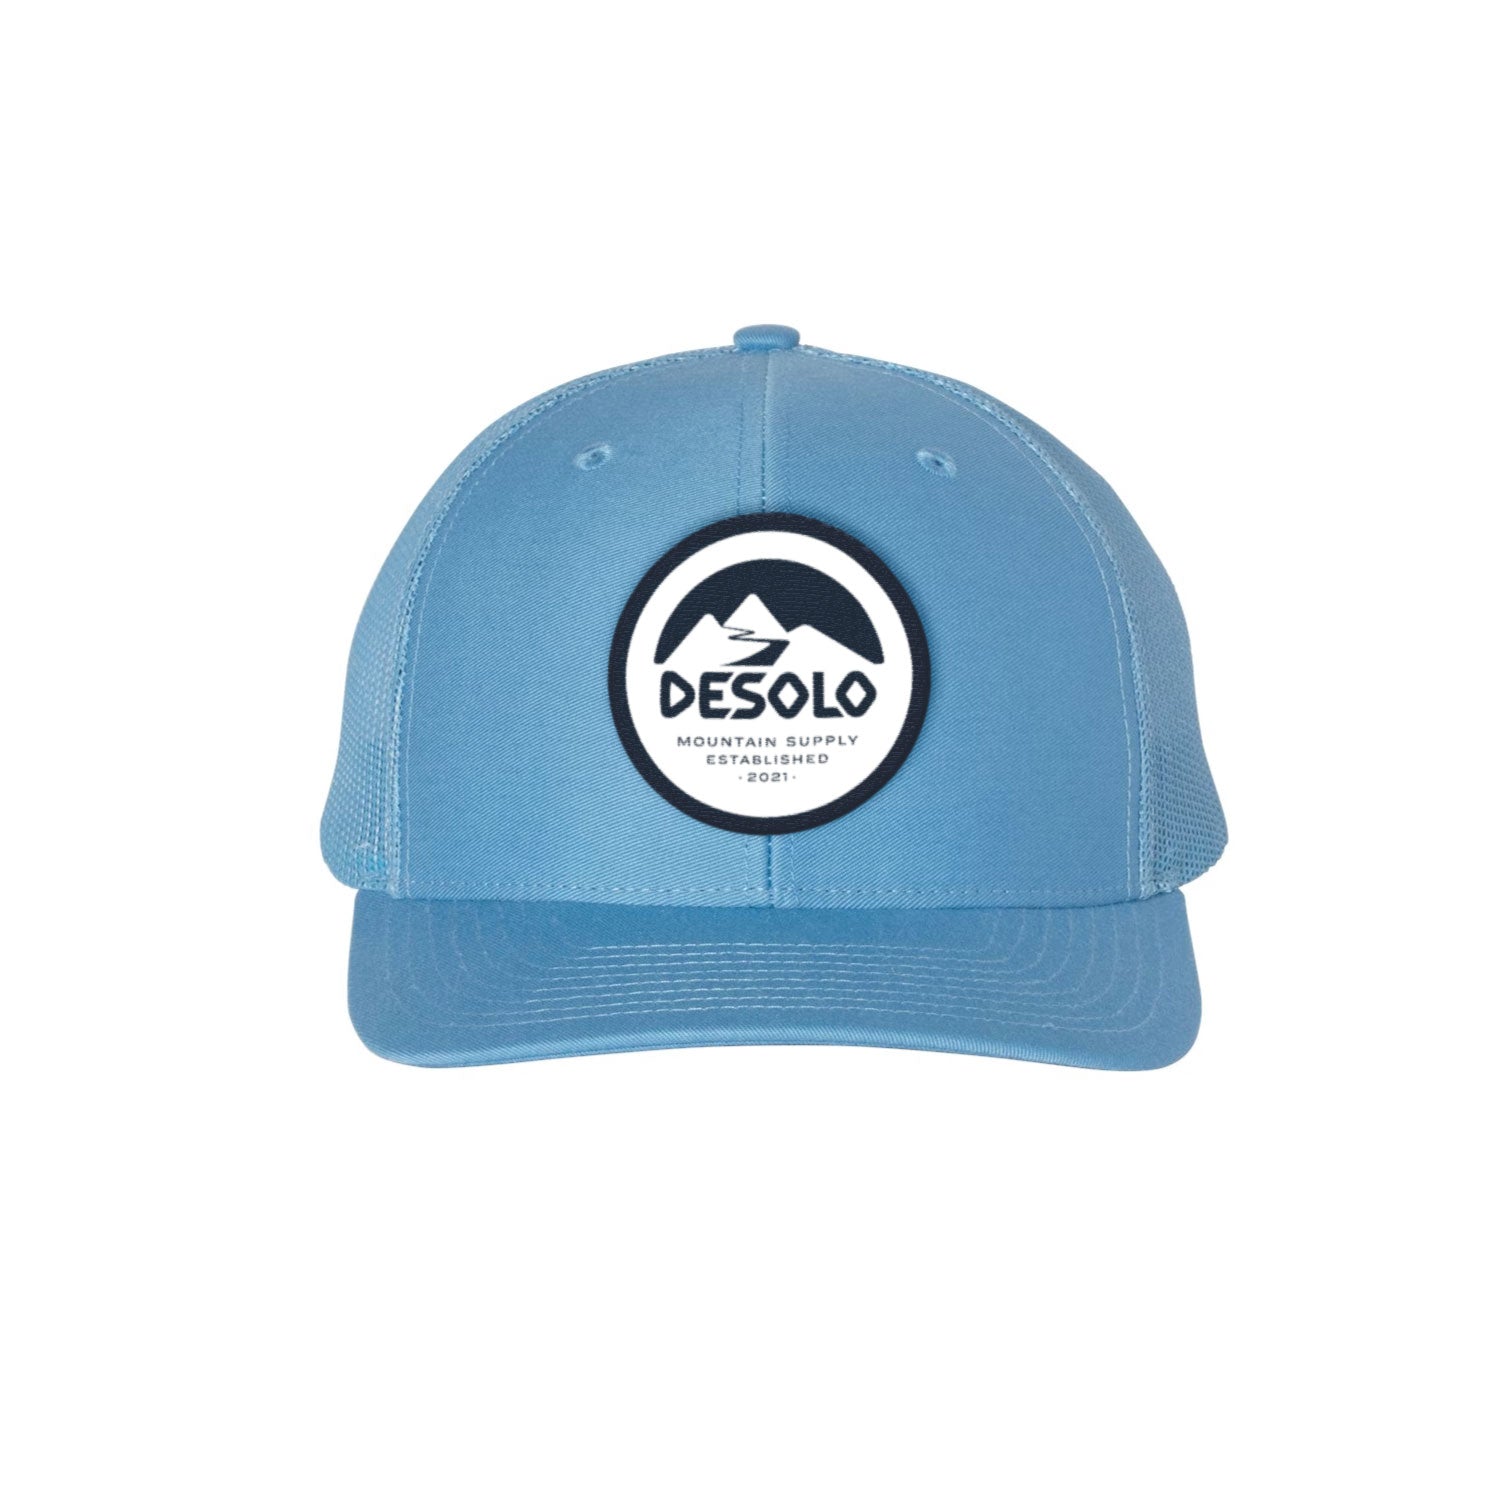 Mt. Official Hat (Trucker Style) - Columbia Blue